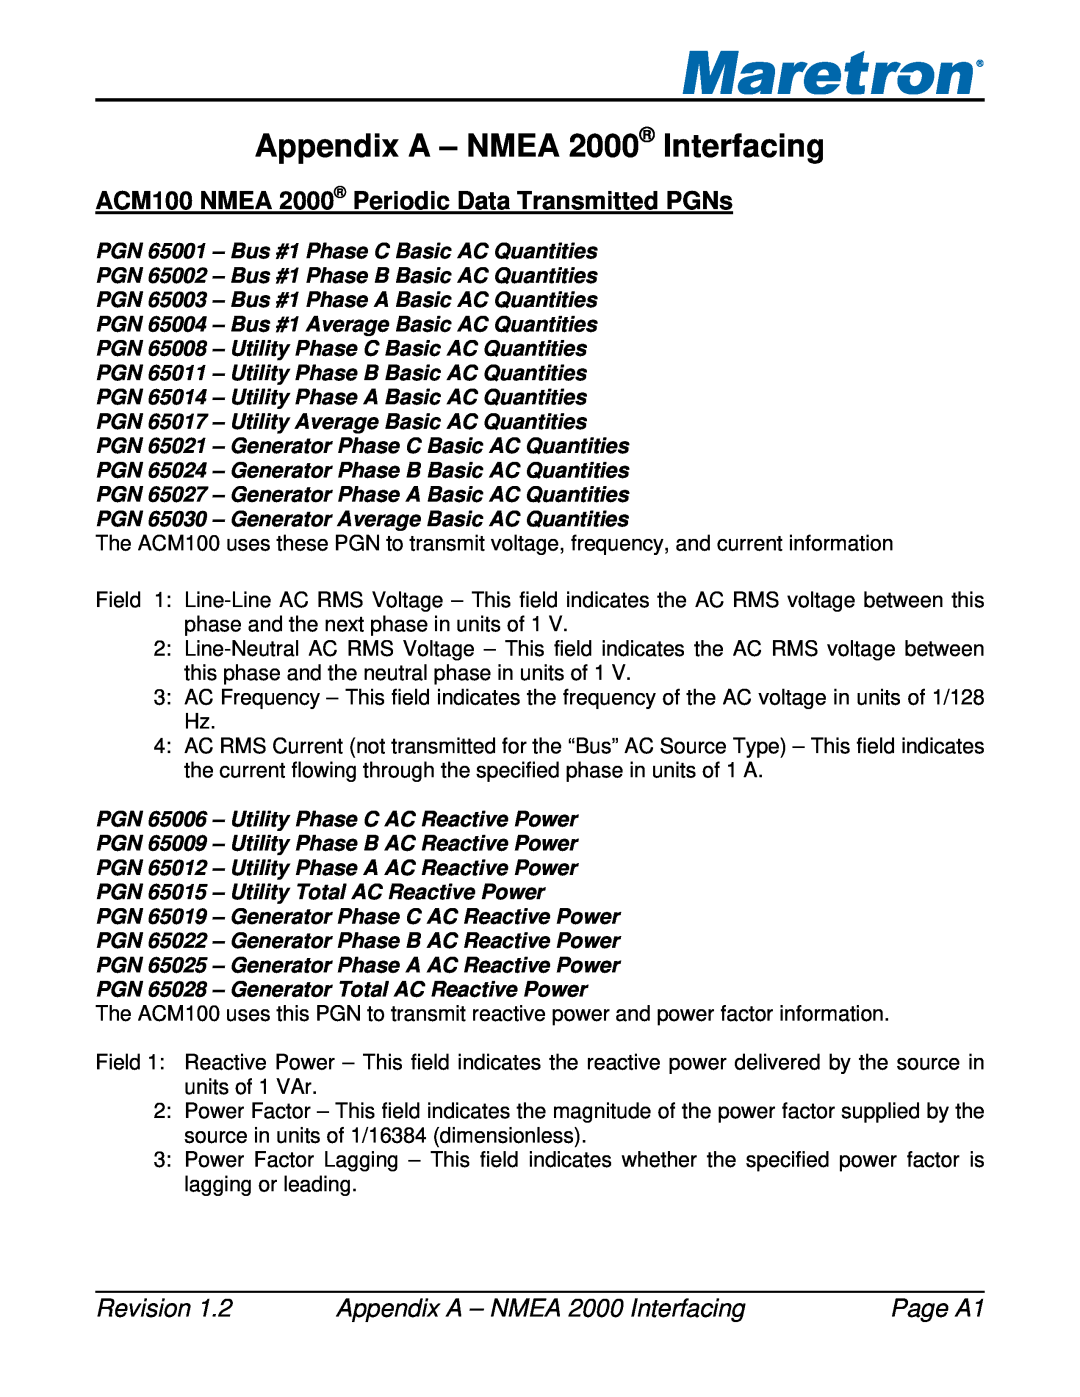 Maretron Appendix A - NMEA 2000 Interfacing, ACM100 NMEA 2000 Periodic Data Transmitted PGNs, Page A1, Revision 